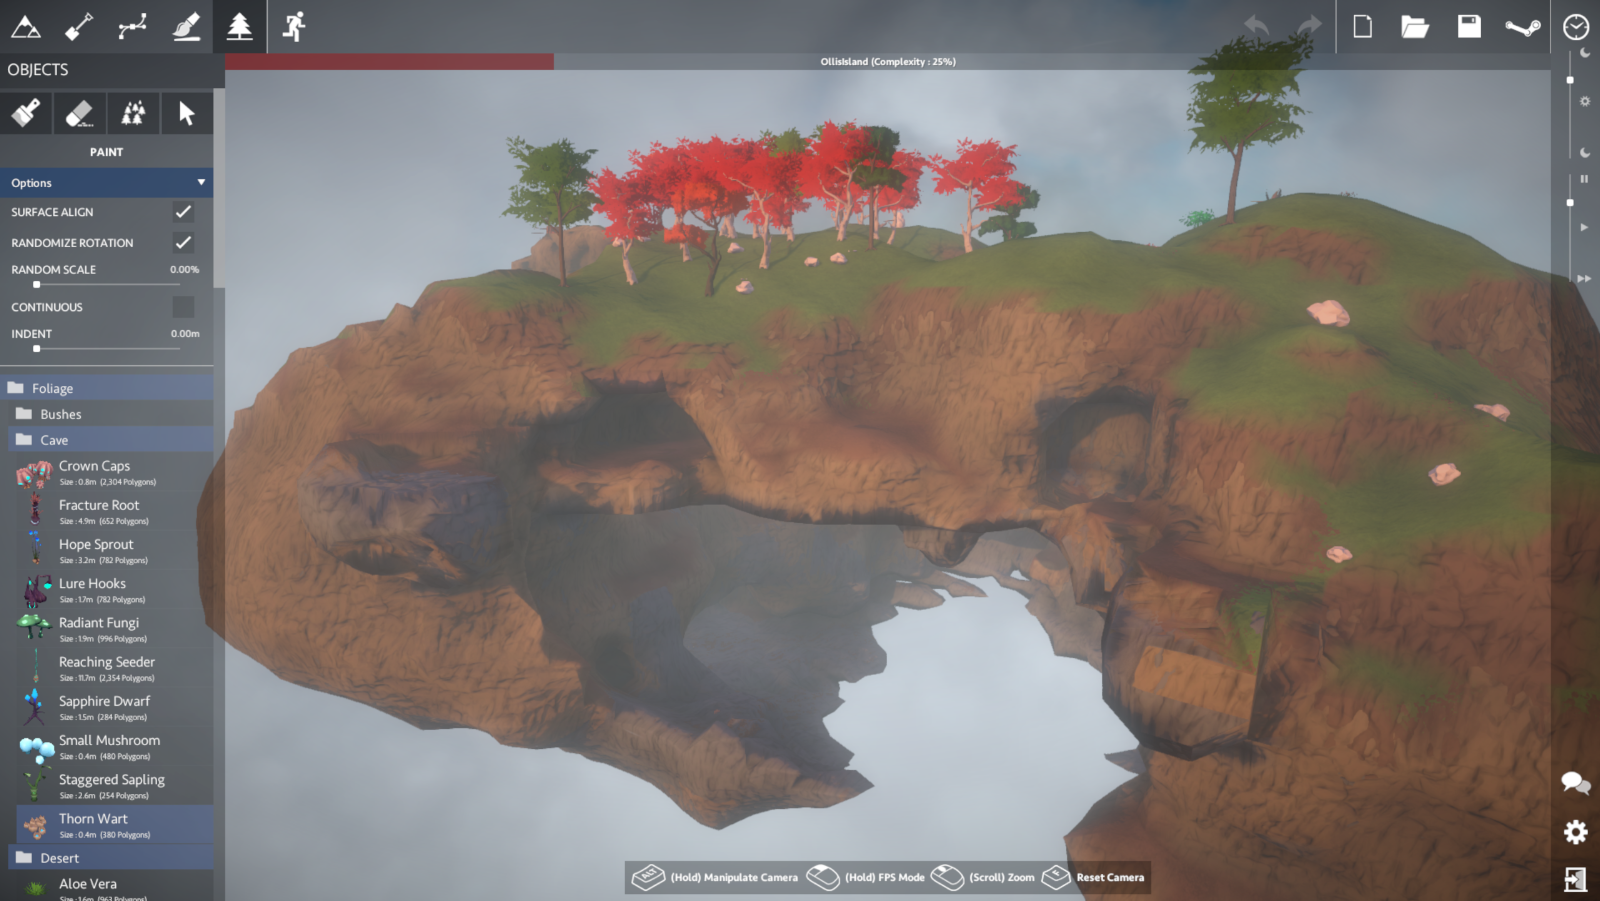 Free Island Creator Tool For Worlds Adrift Unveiled